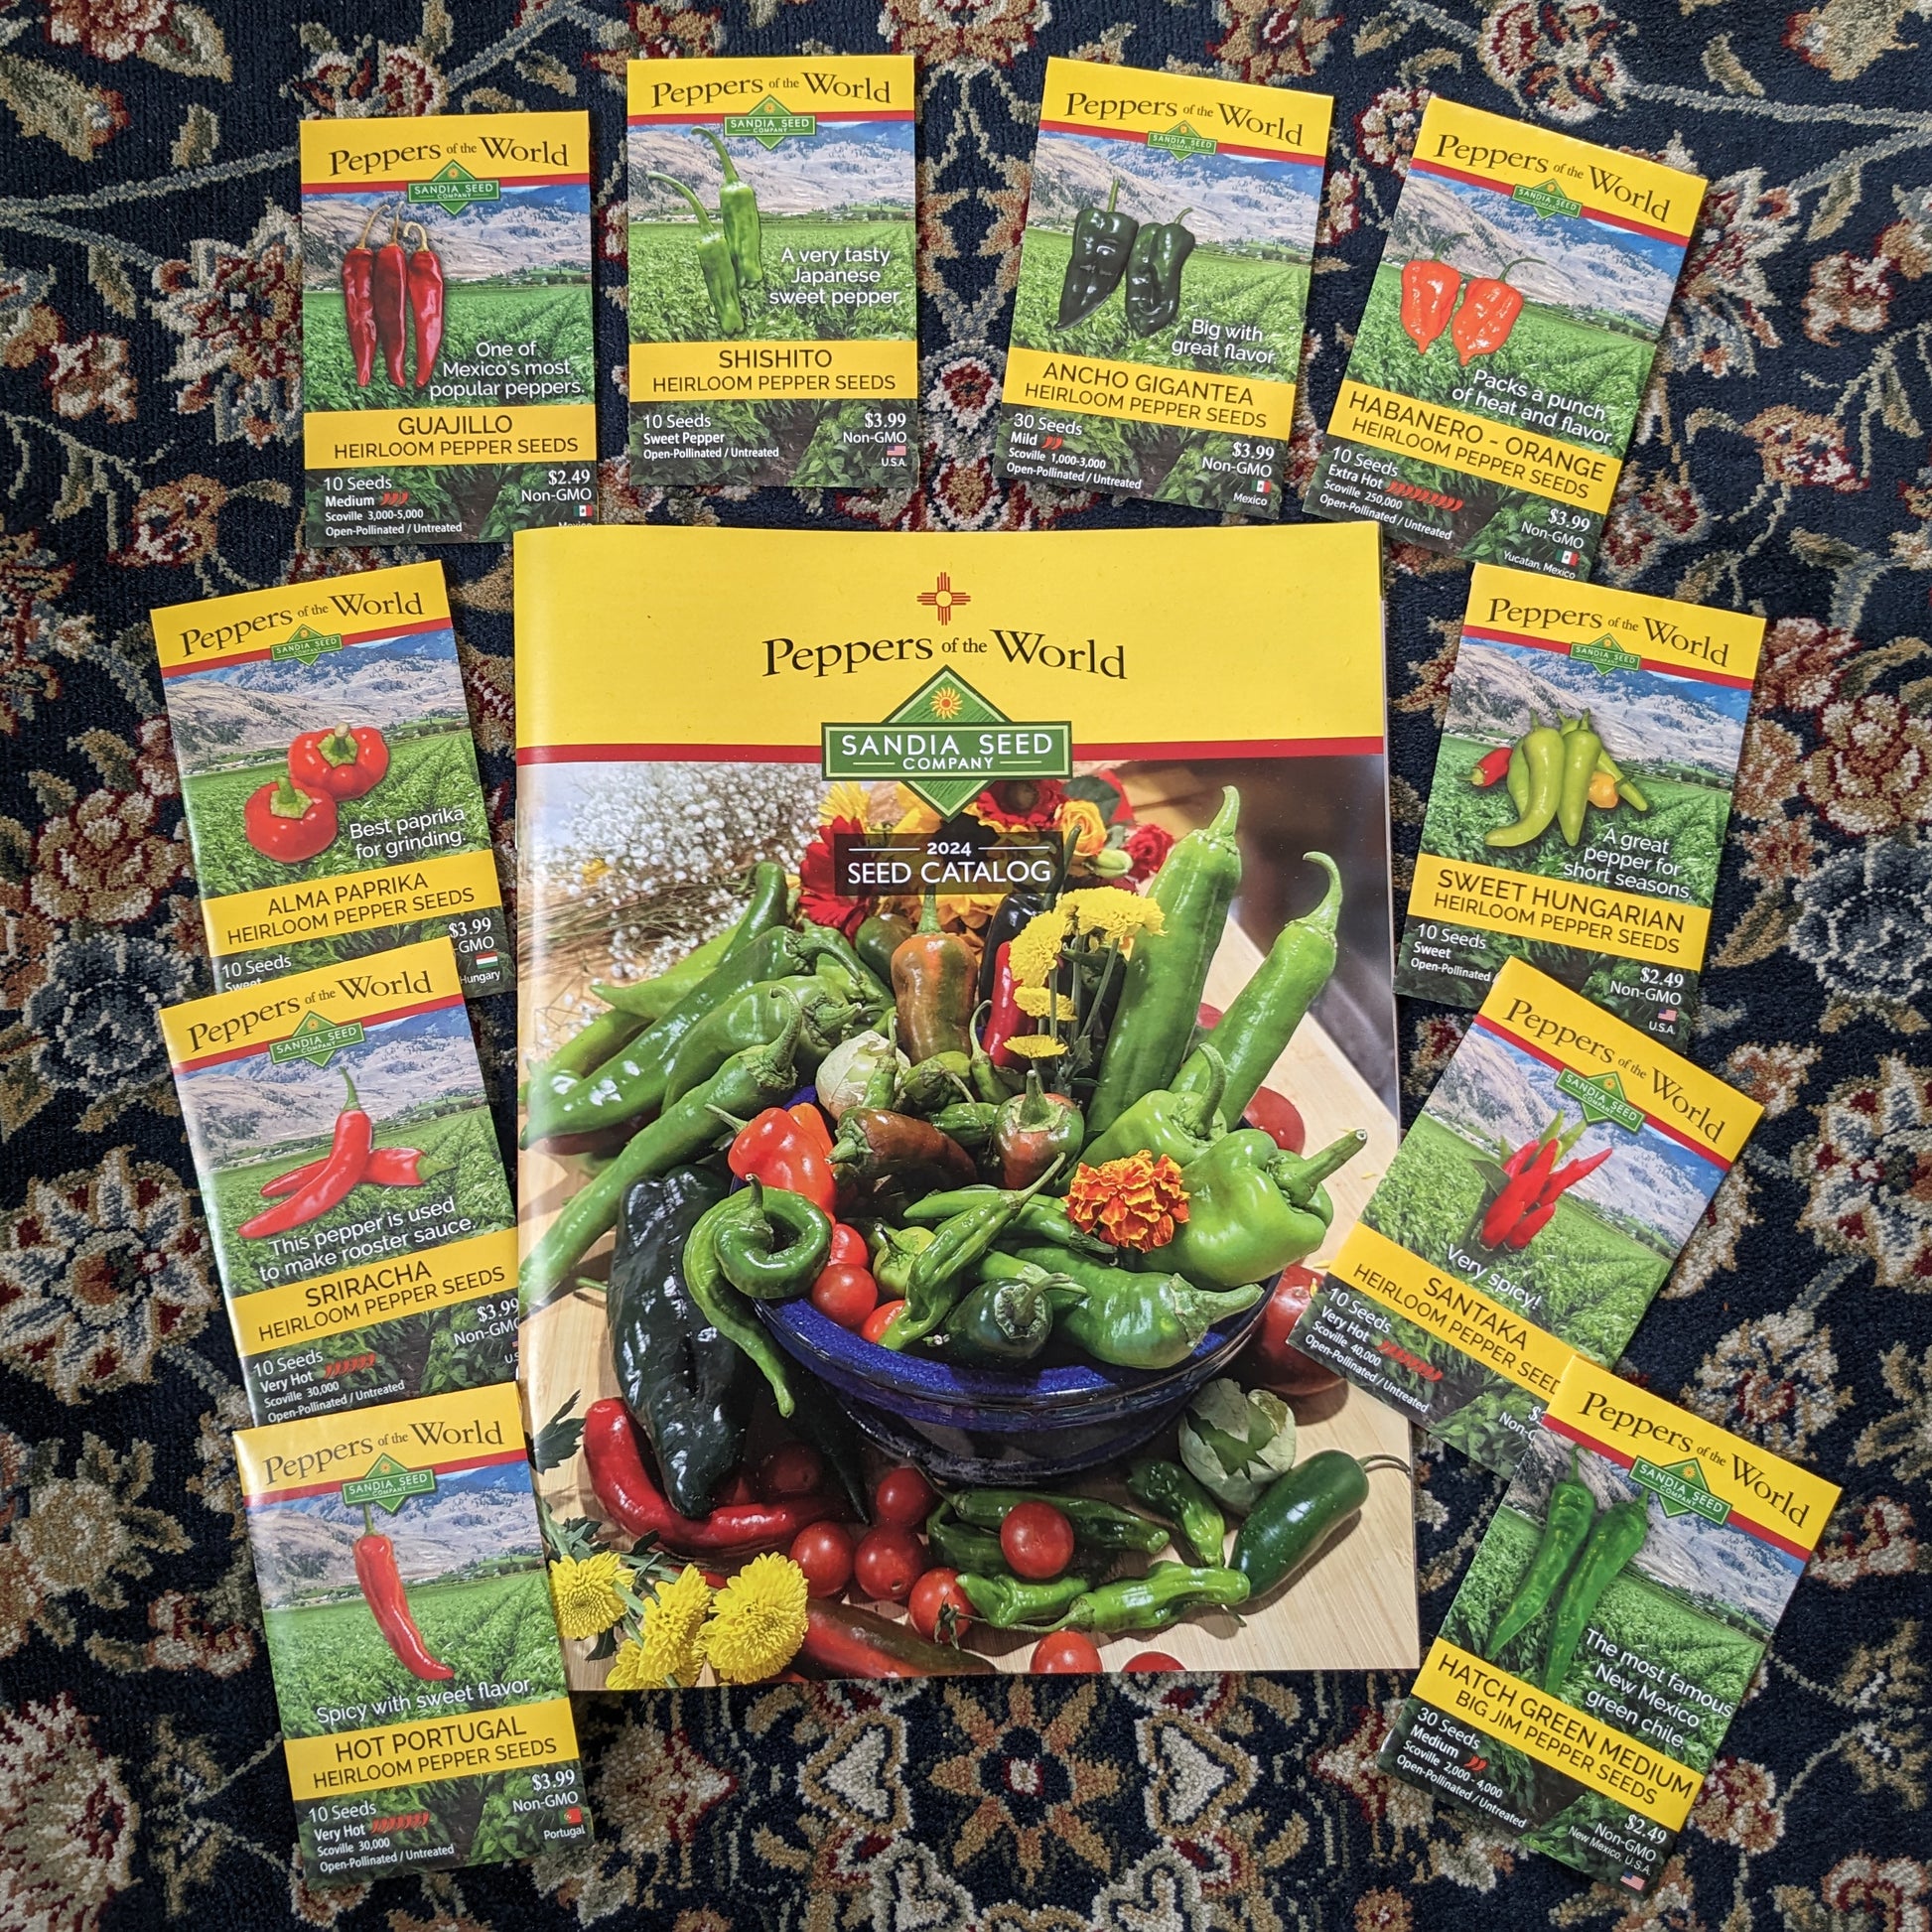 Seed Catalog shown with seed packets